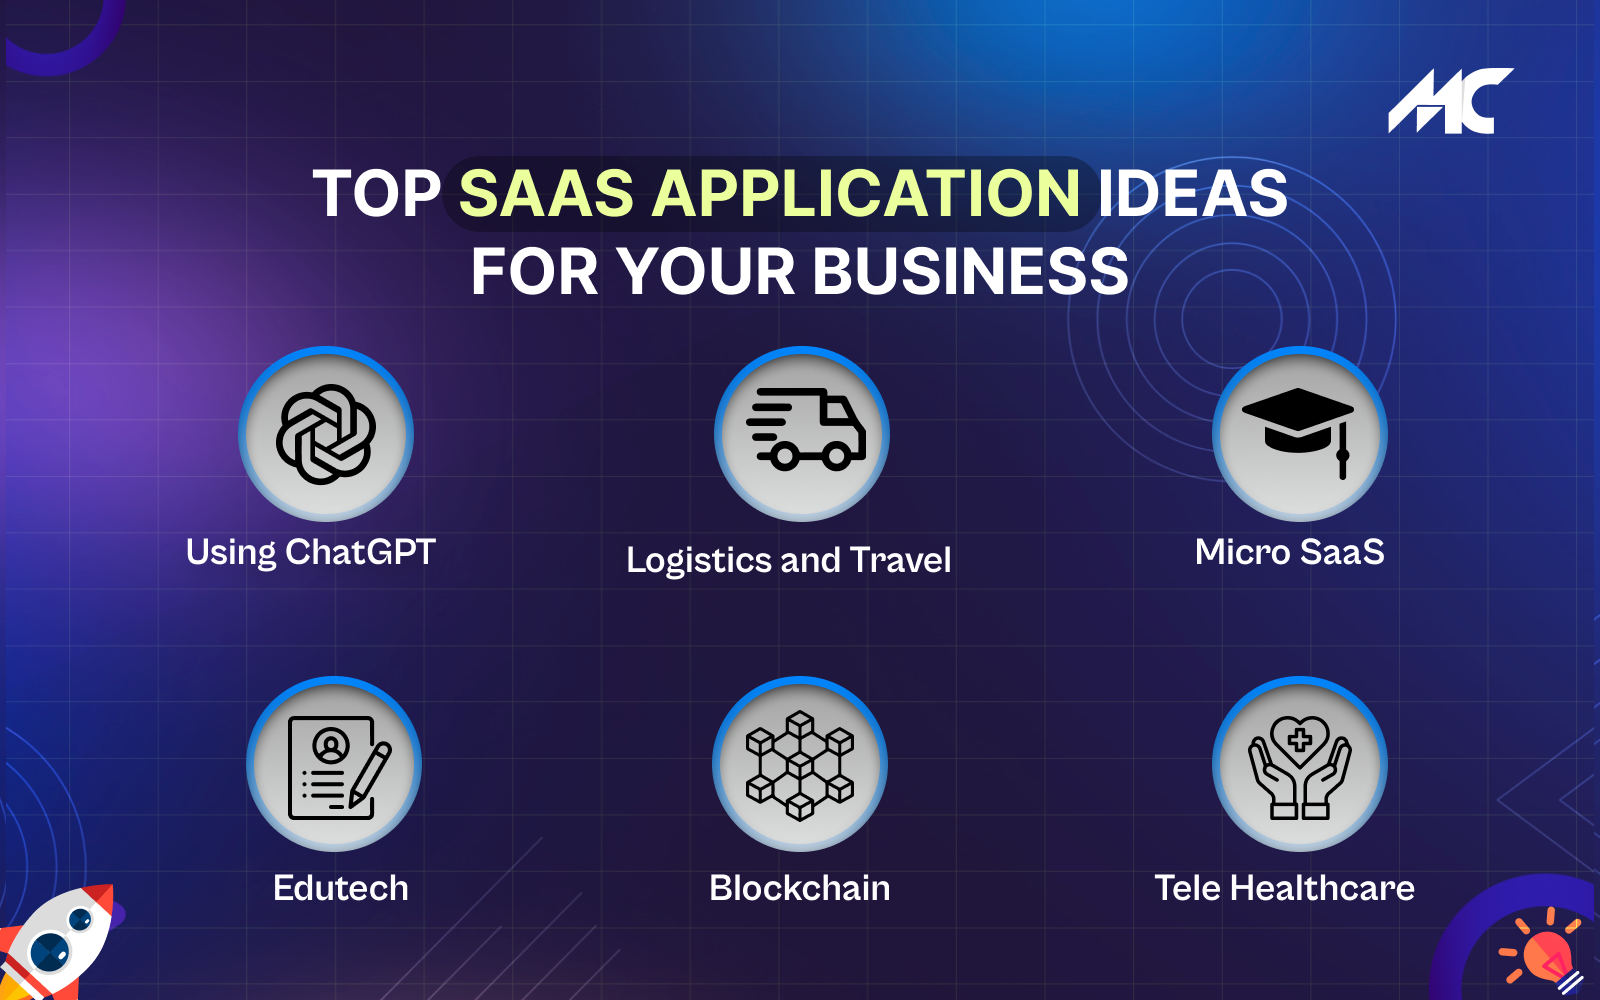 <img src="Top-SaaS-Application-Ideas-for-Your-Business.png" alt="Top-SaaS-Application-Ideas-for-Your-Business">